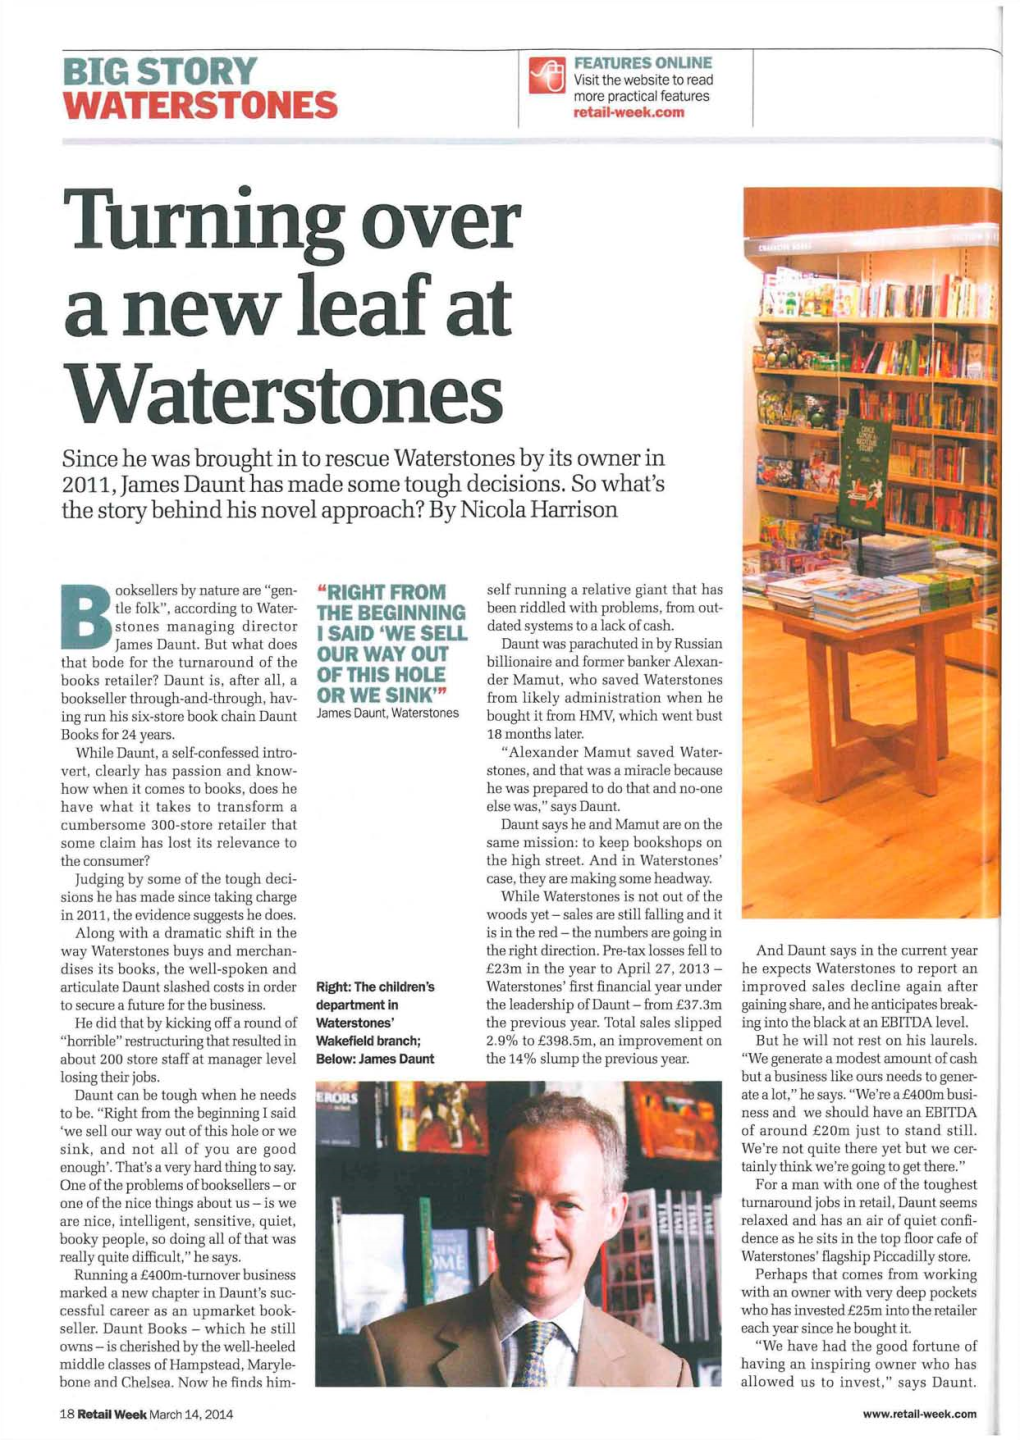 Turning Over a New Leaf at Waterstones Since He Was Brought in to Rescue Waterstones by Its Owner in 2011, James Daunt Has Made Some Tough Decisions